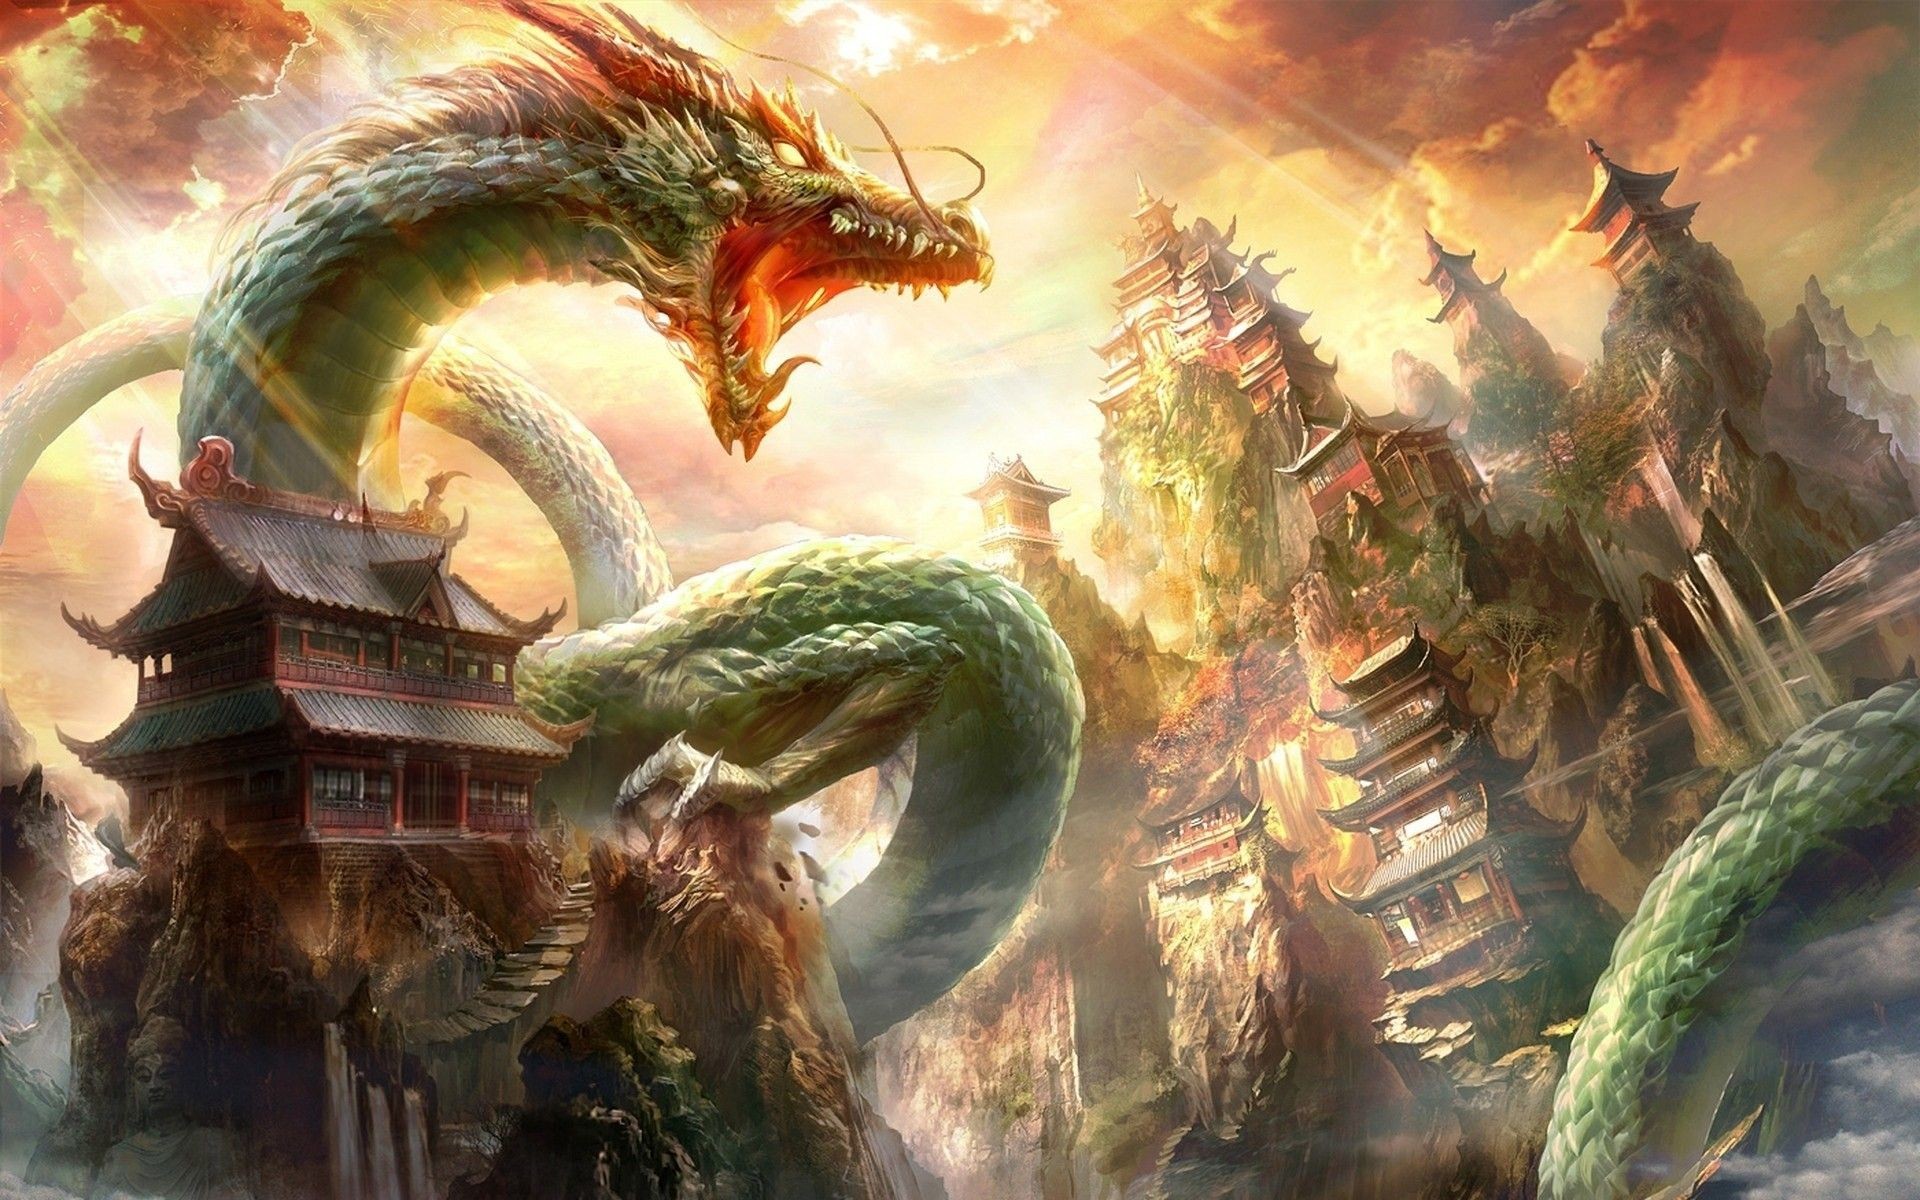 1920x1200  Chinese Dragon Wallpaper (69+ images)"> Â· Download Â· 1920x1080  Top Collection of Chinese Dragon Wallpapers ...